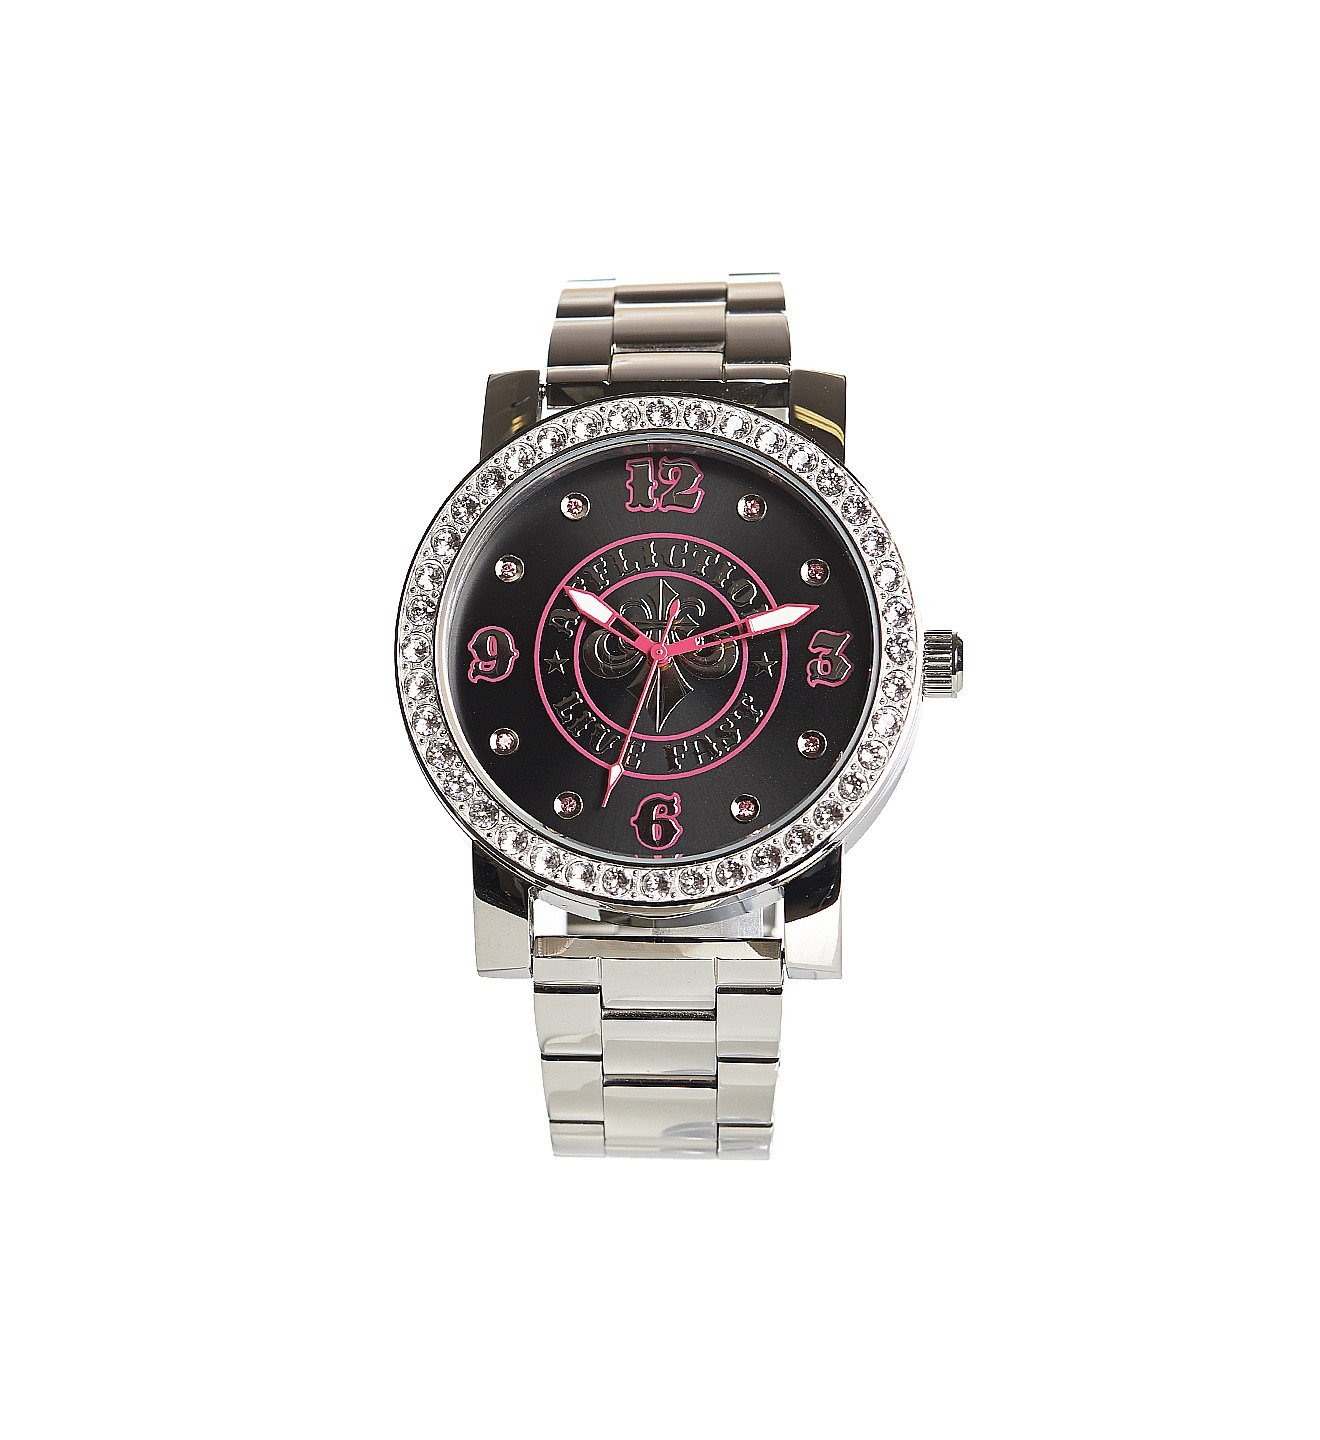 Crystal Watch - Womens Watches - Affliction Clothing